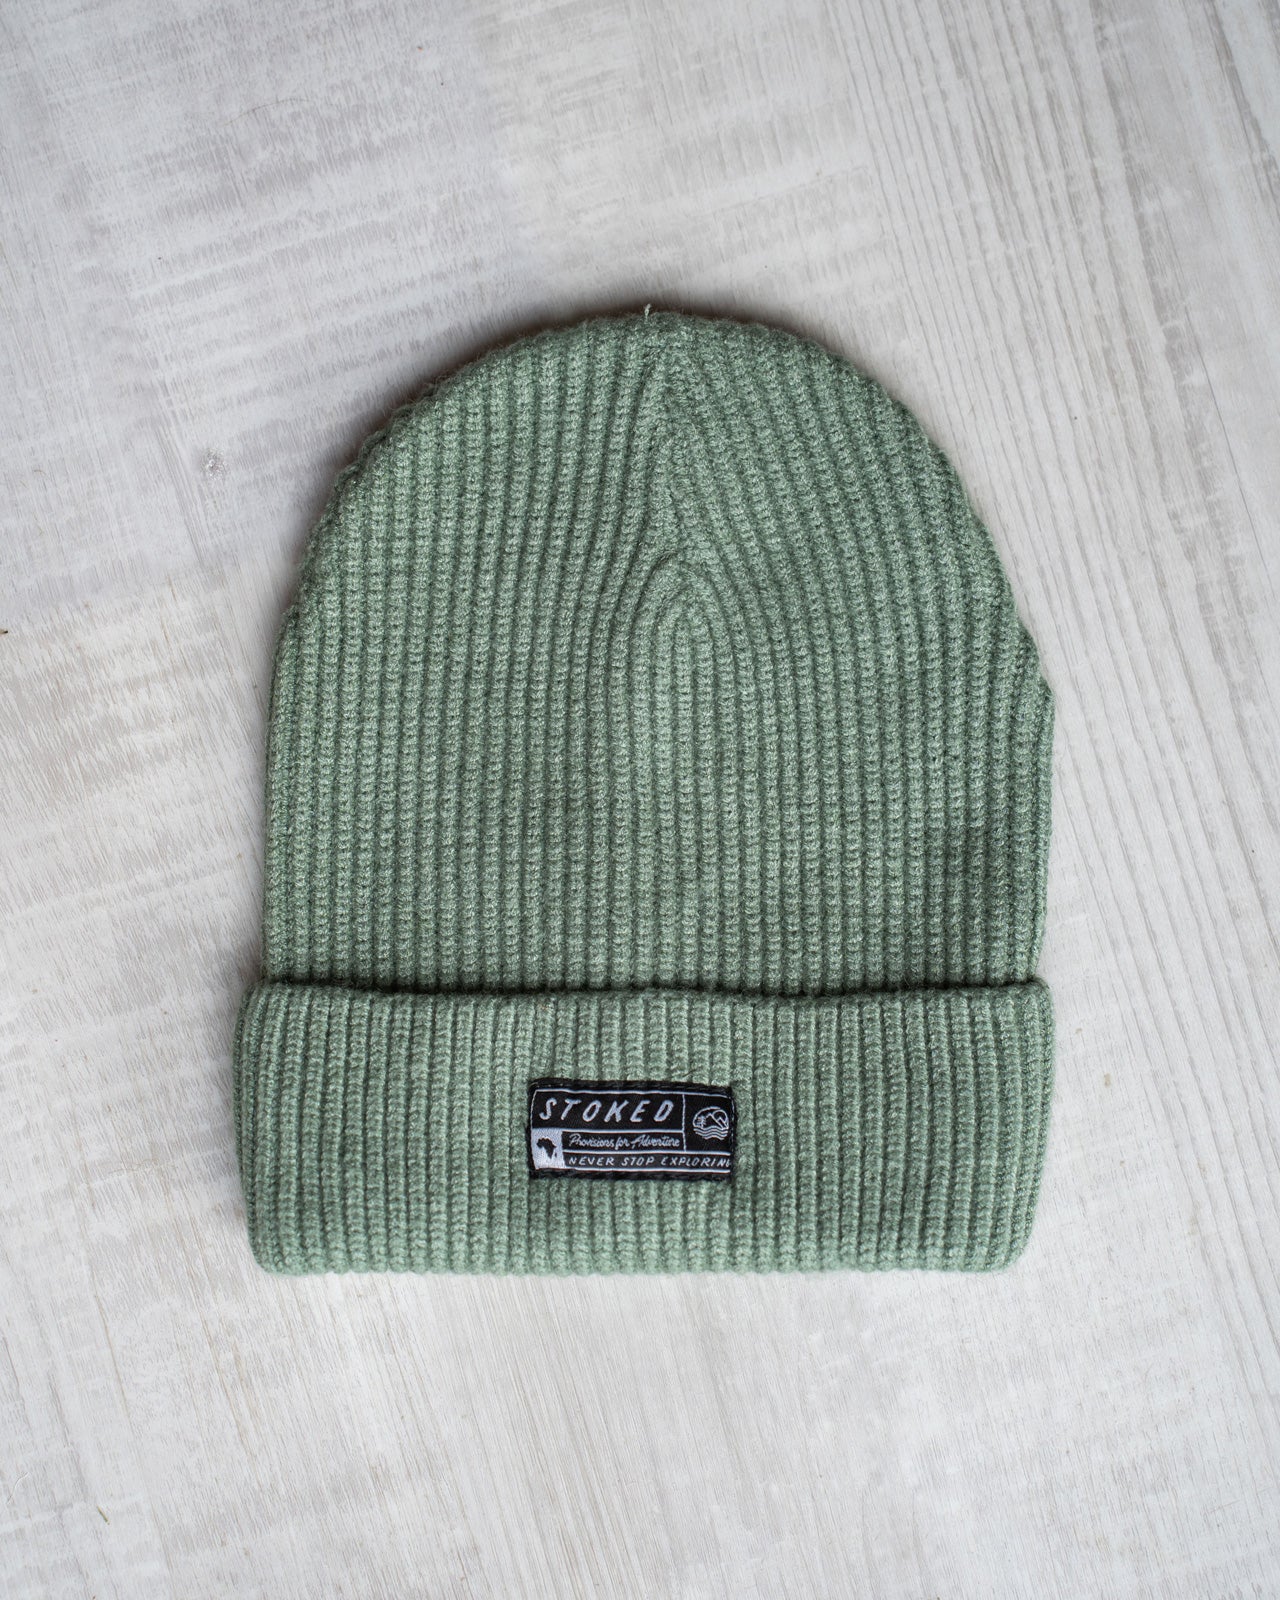 The Nomad Beanie - Sage Green - Stokedthebrand. Lifestyle products for outdoor adventures. Made in South Africa